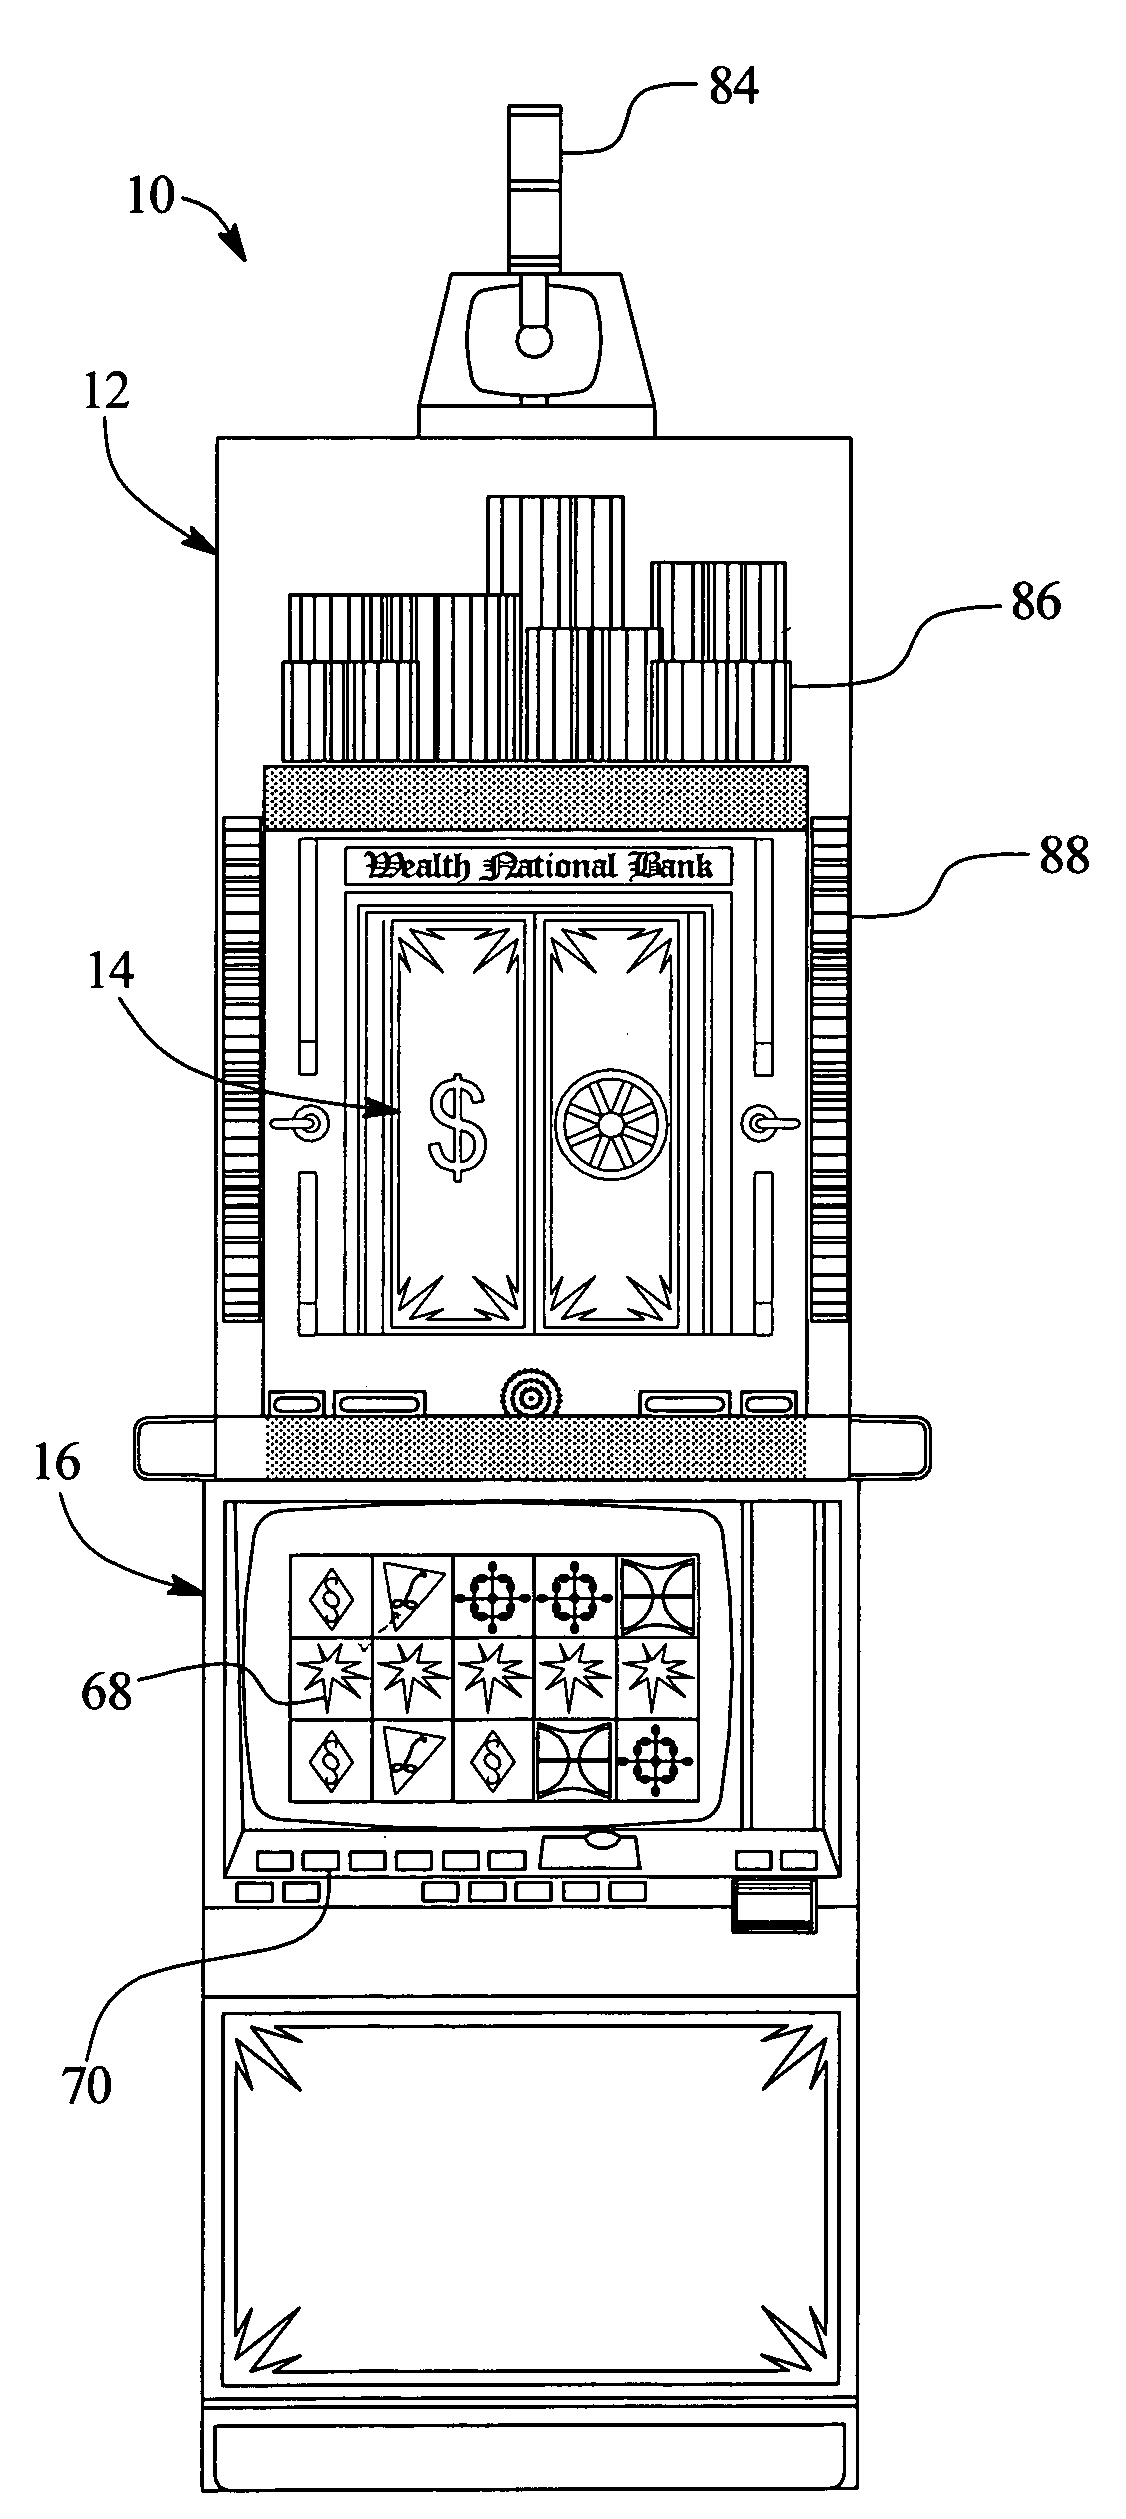 Method and apparatus for a slot machine gaming device simulating a bank robbery